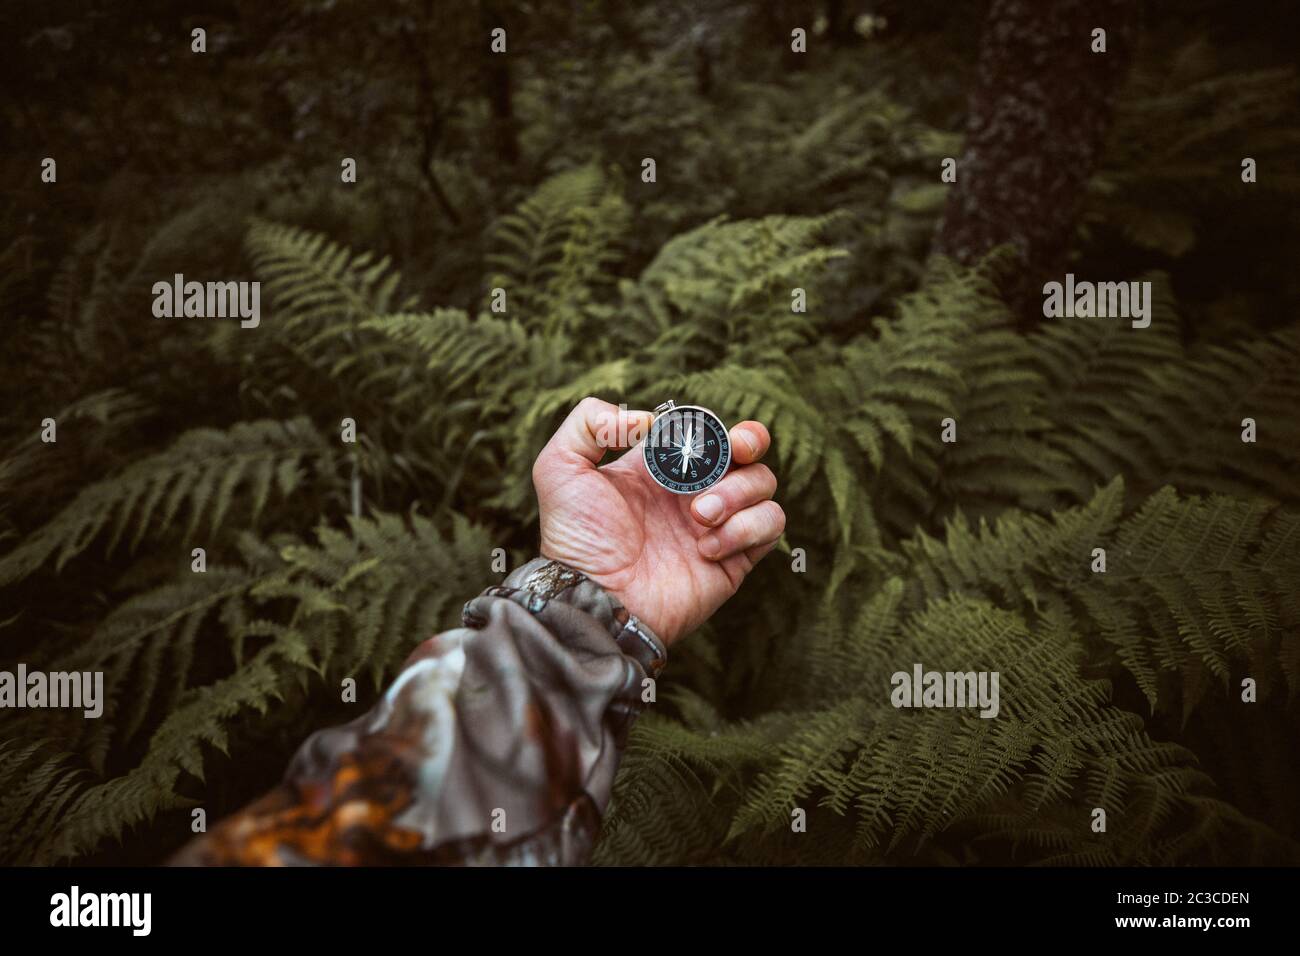 Compass in a hand with blurred fern leaves background. Hiker searching direction in the wilderness forest. Copy space. Stock Photo